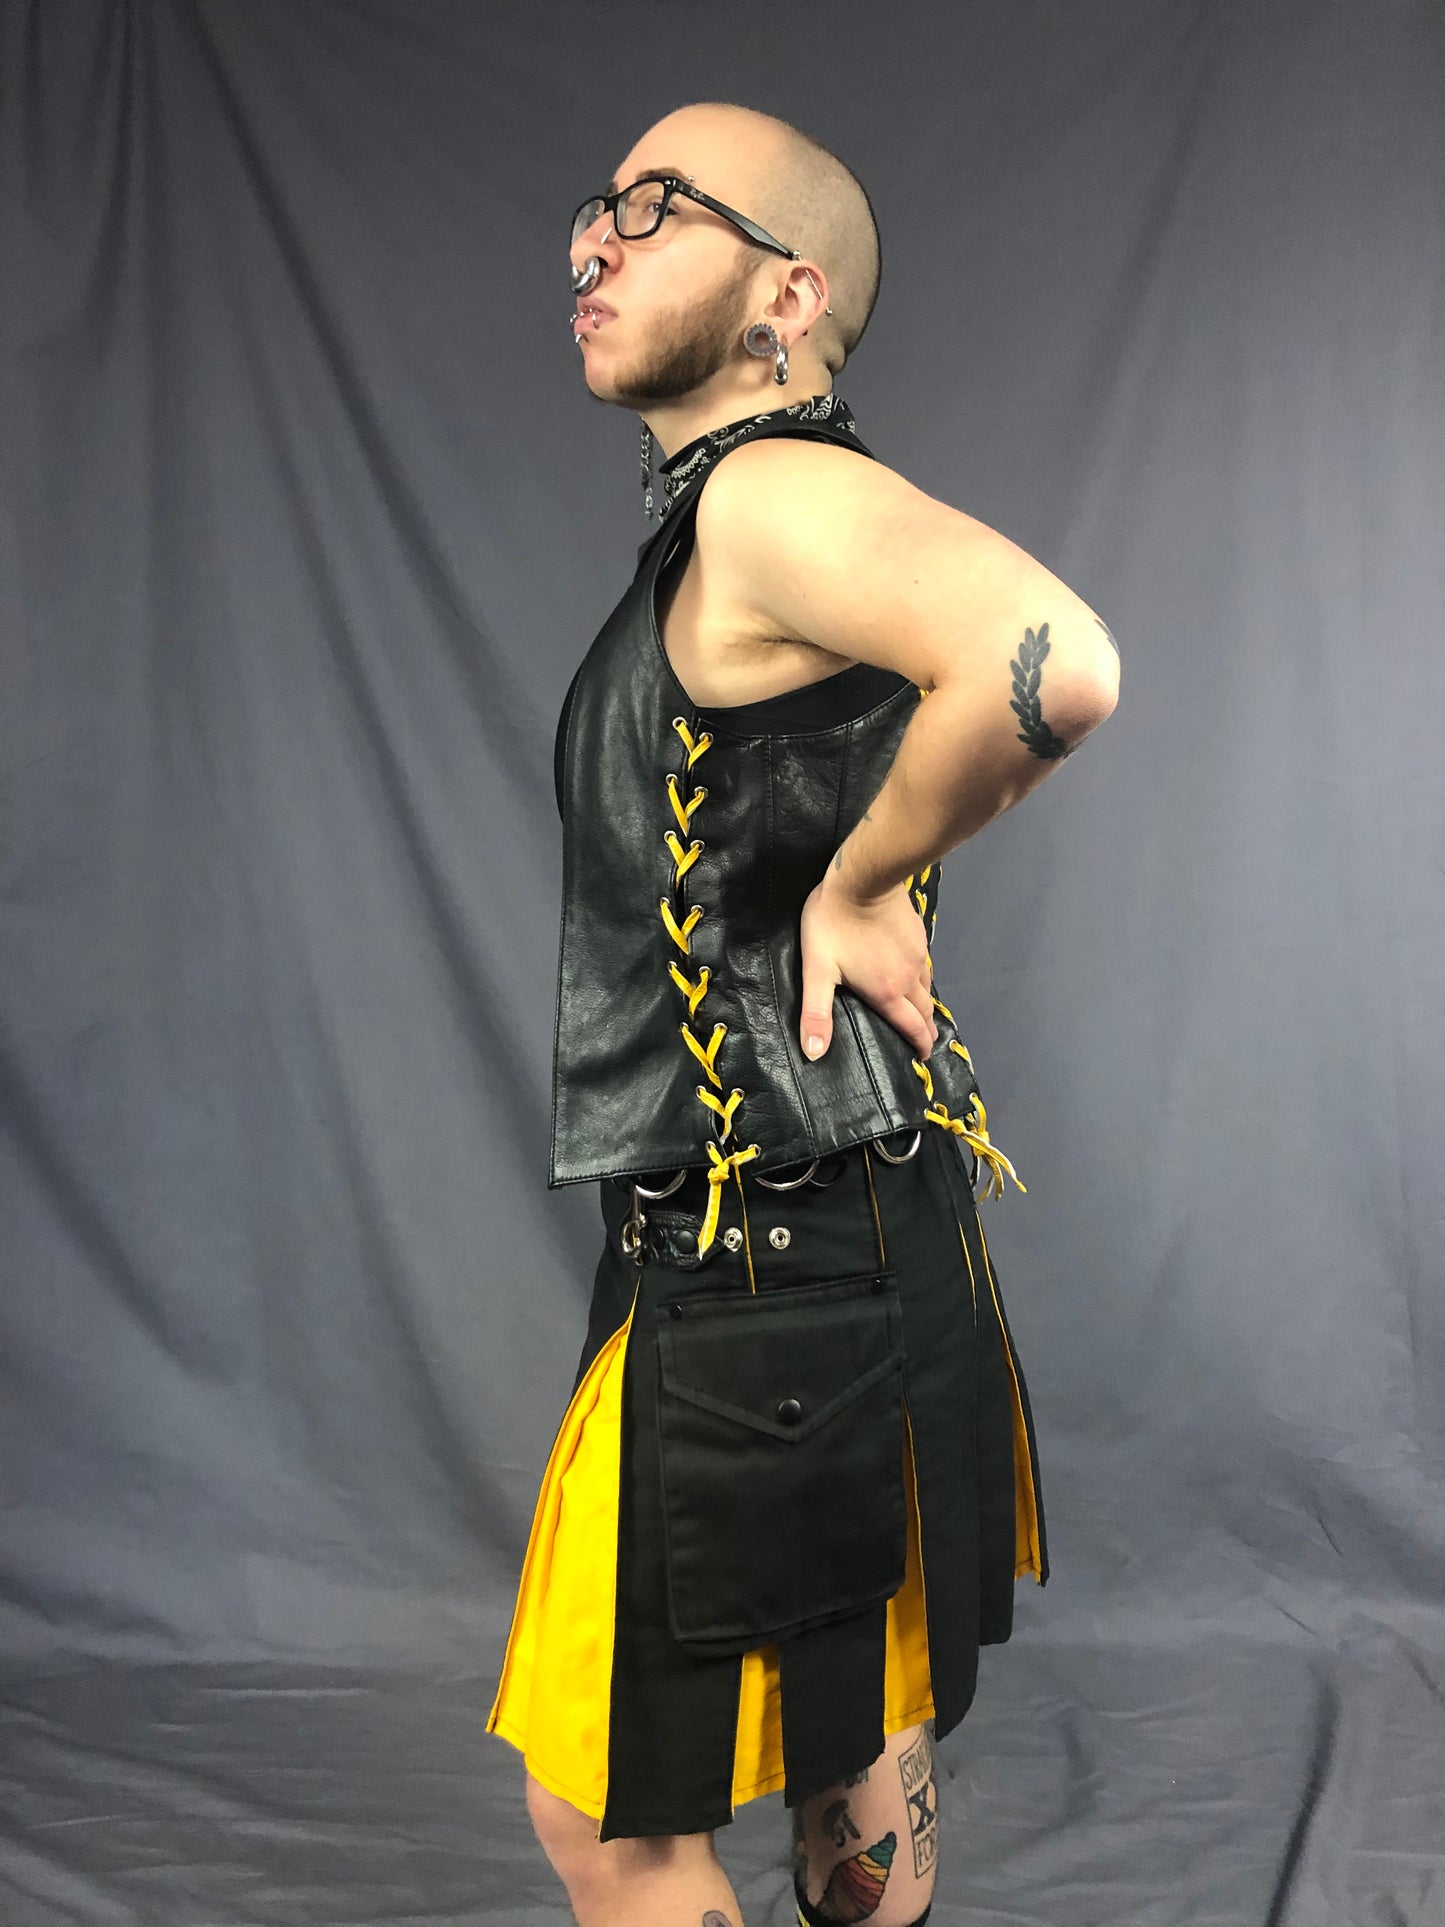 Left side view of front & back lace cowhide bar vest with yellow laces, matched with a black kilt with yellow panels.